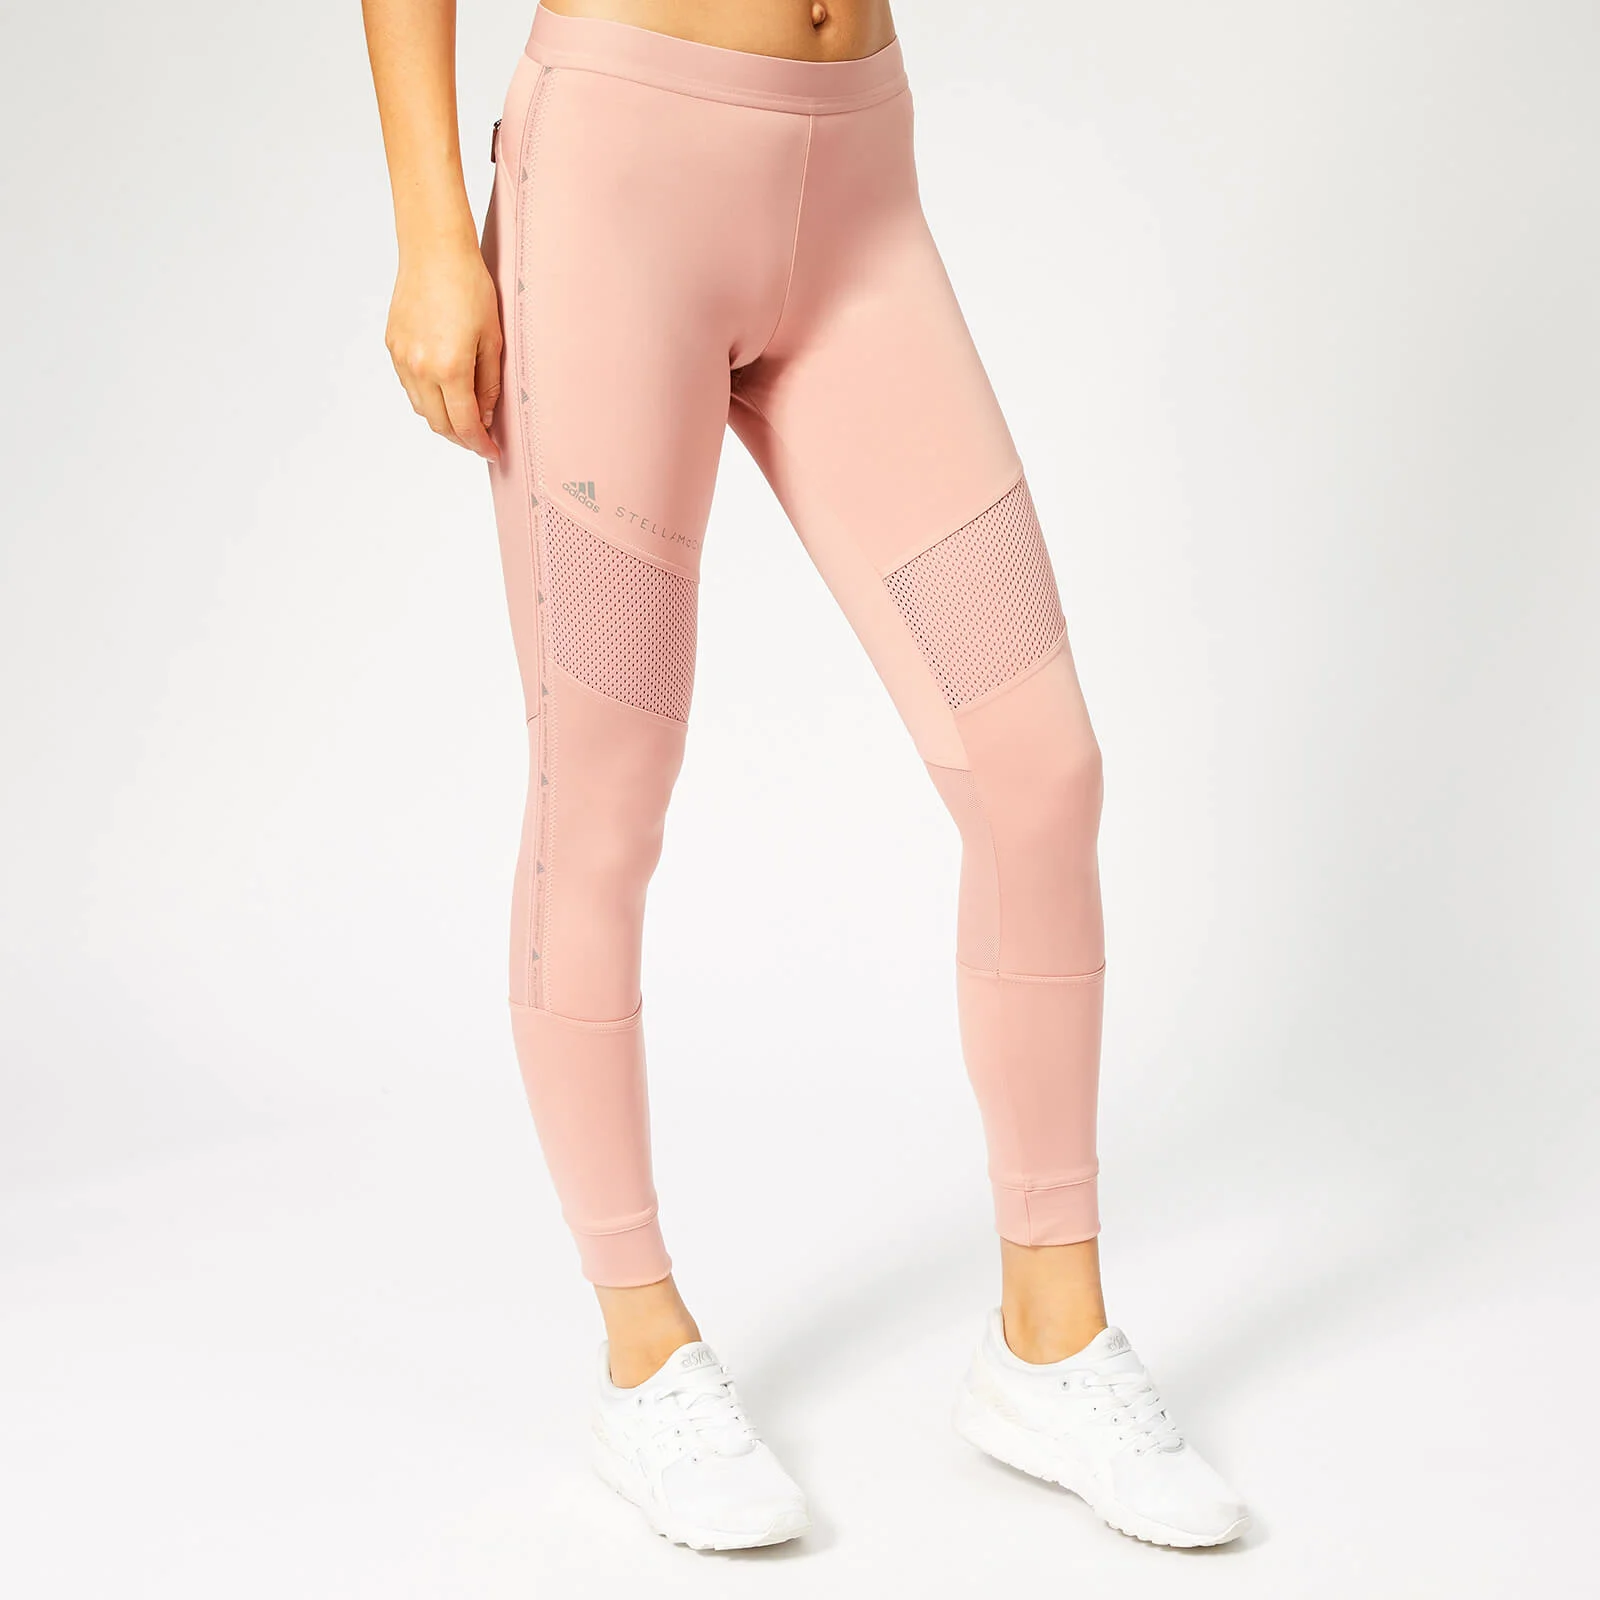 adidas by Stella McCartney Women's Essential Tights - Band Aid Pink Image 1